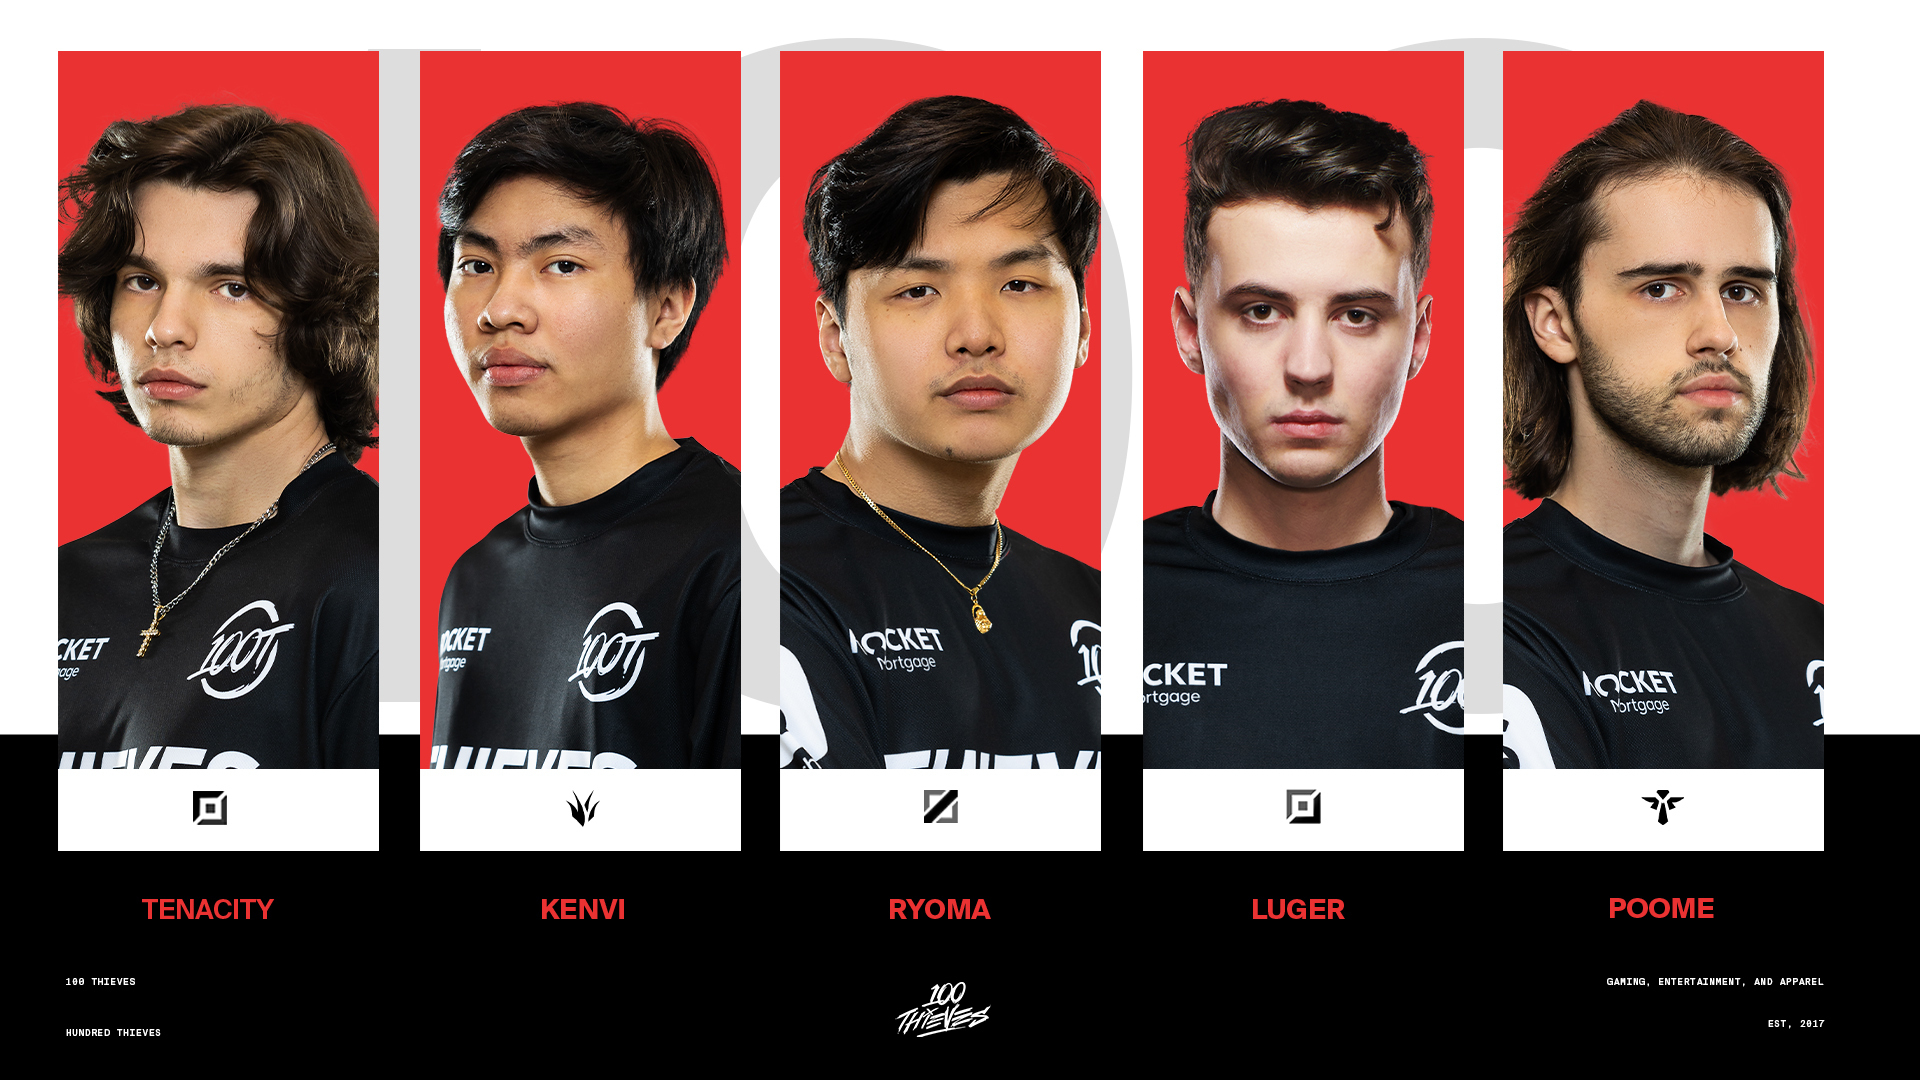 Luger 100 Thieves